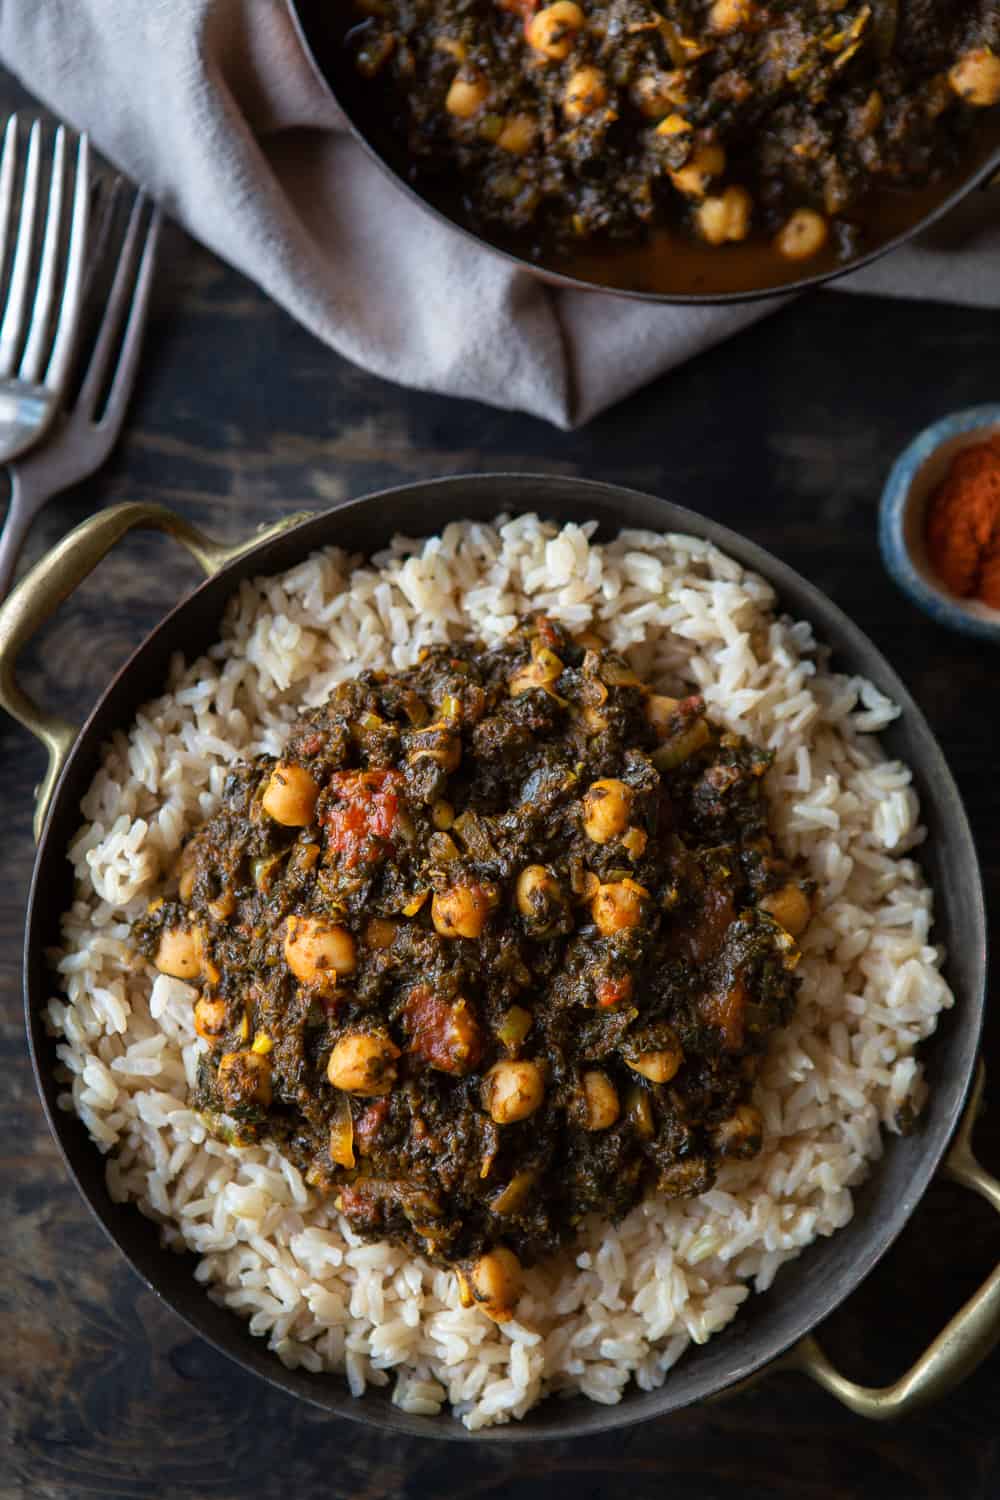 Ghanaian Spinach Stew with Chickpeas (Vegan)